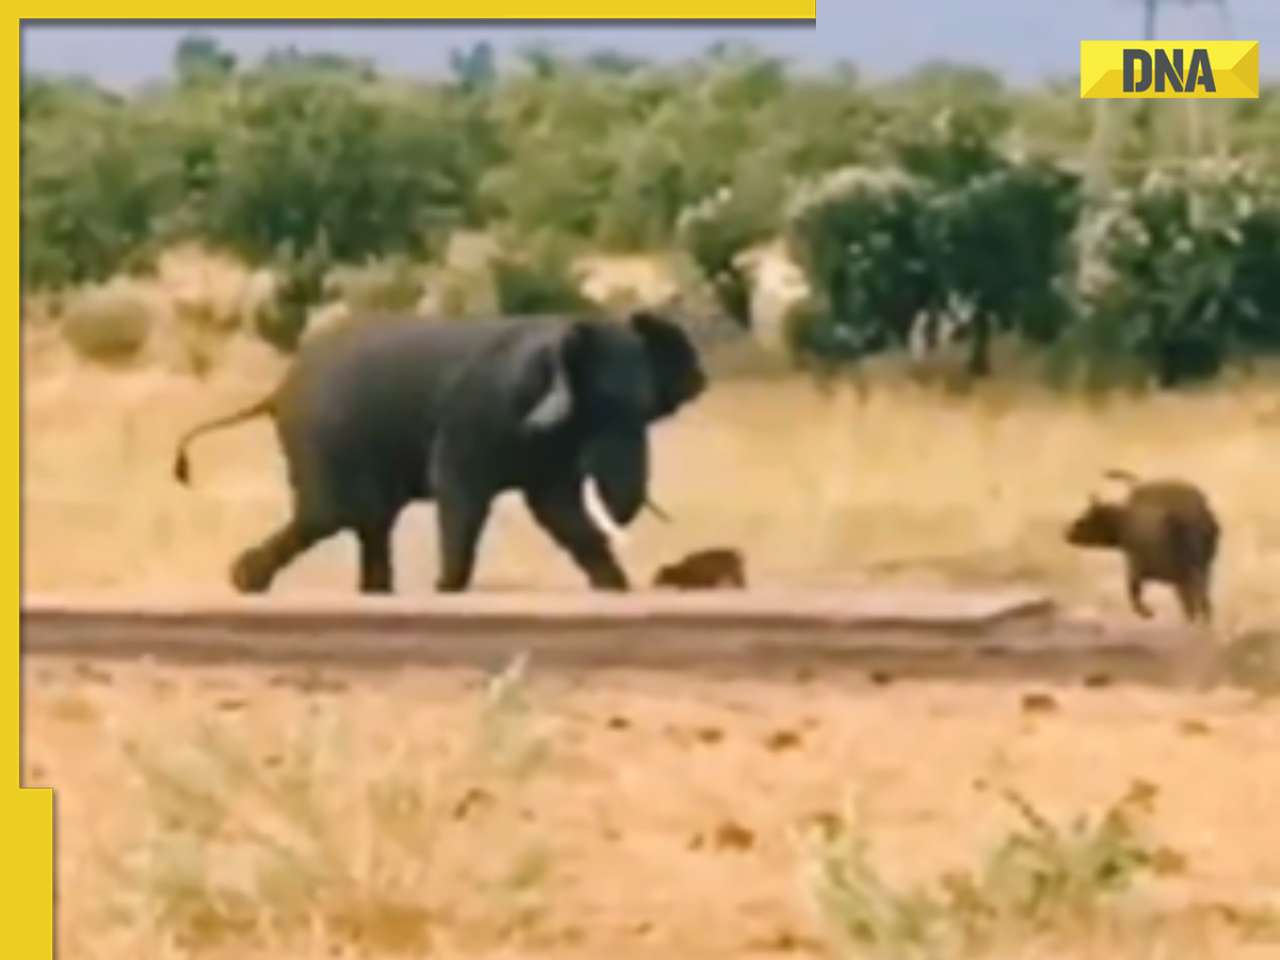 Tiny but mighty: Buffalo calf fearlessly charges elephant to defend mom, viral video